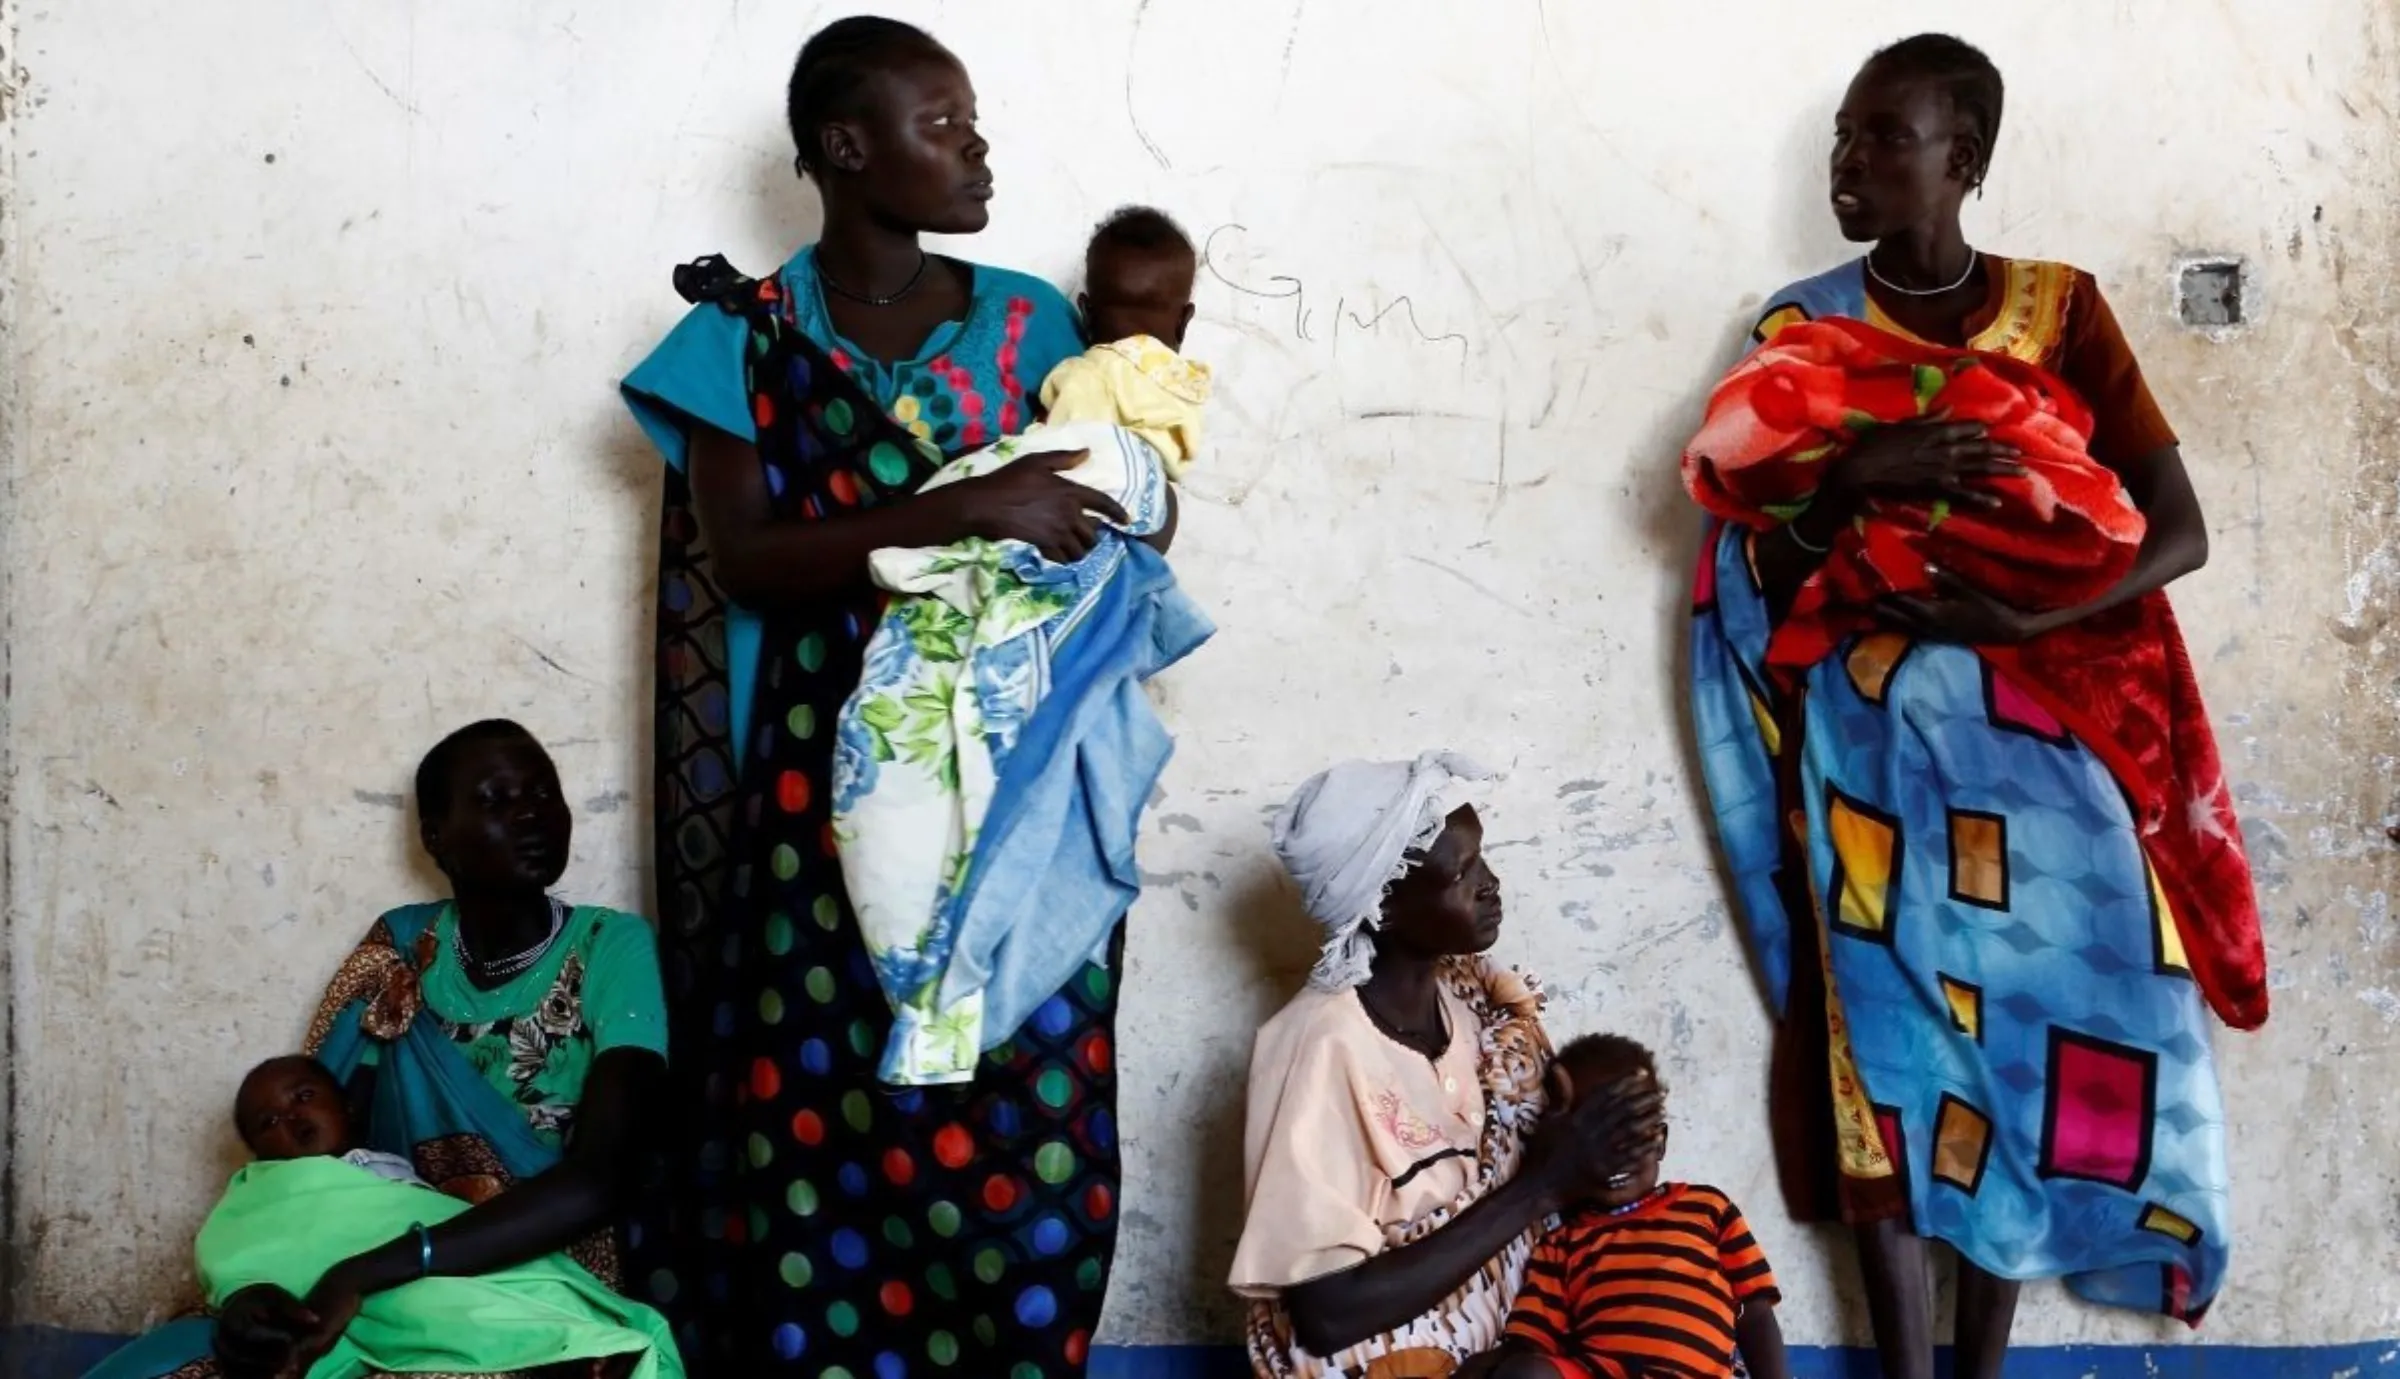 Women hold their babies as they wait for a medical check-up at a United Nations International Children's Fund (UNICEF) supported mobile health clinic in Nimini village, Unity State, South Sudan February 8, 2017